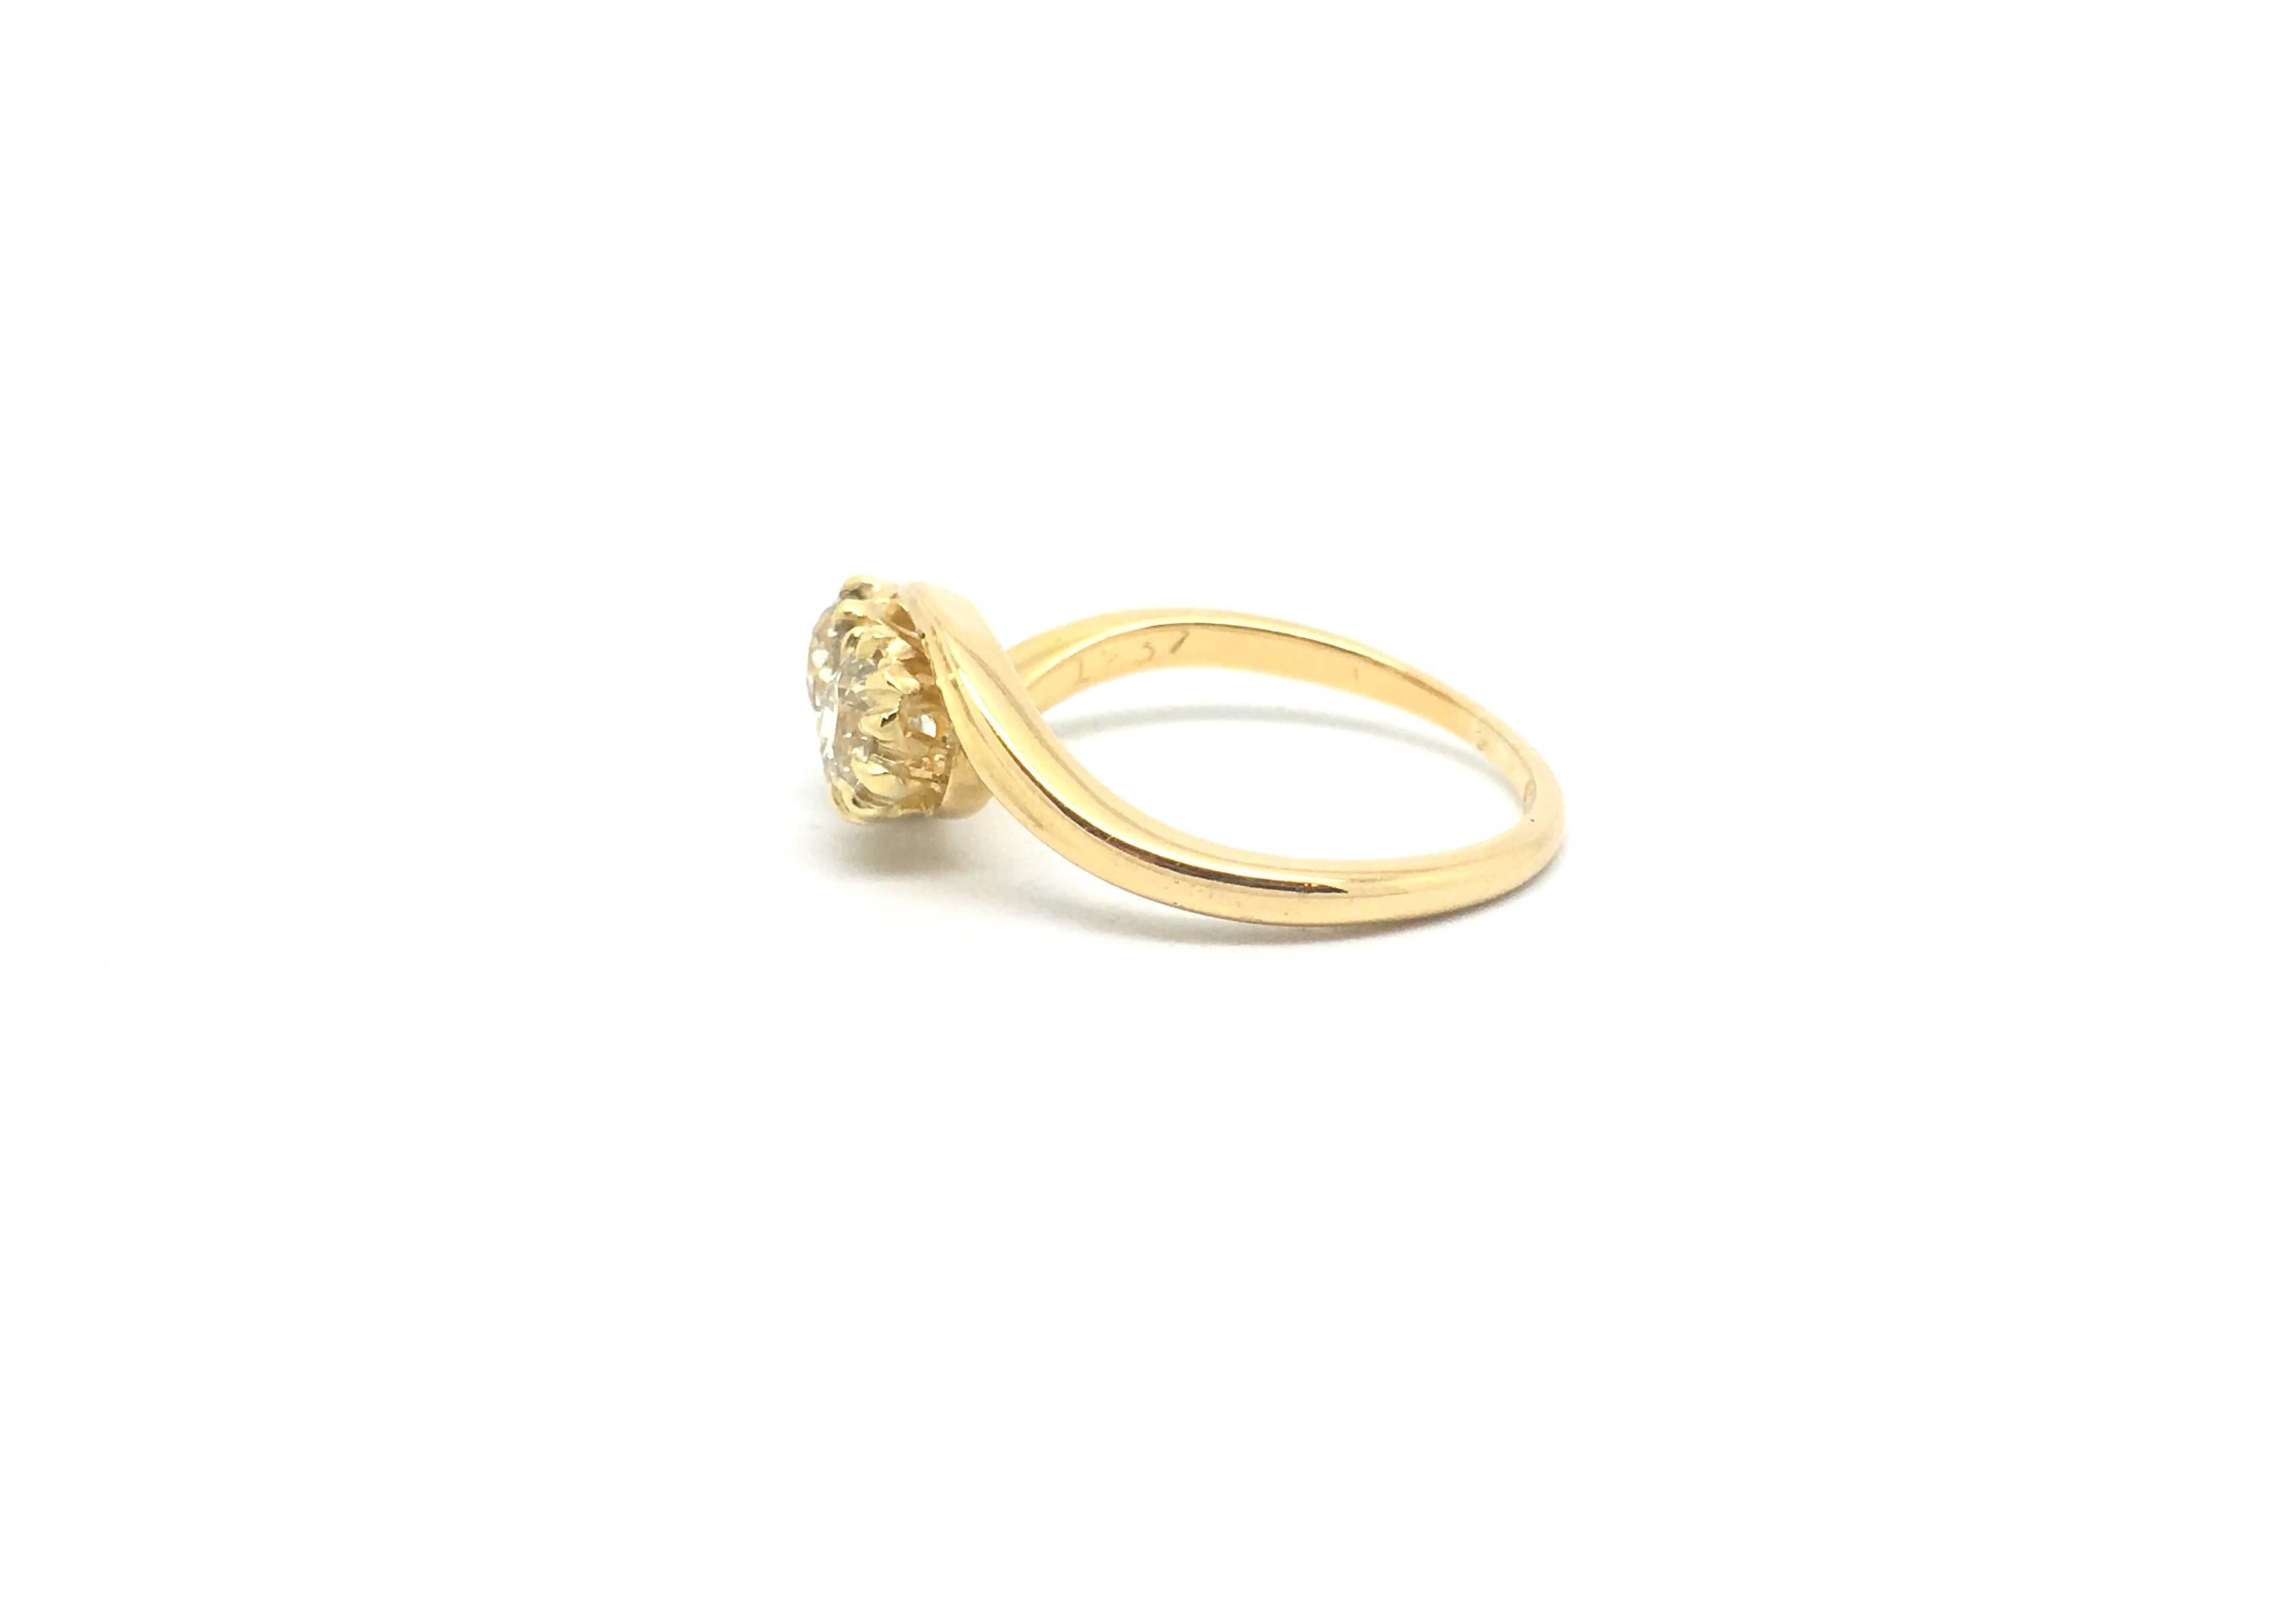 A fully hallmarked diamond two stone ring in 18ct yellow gold.

Hallmarked for 18ct gold, Birmingham 1902.

The old cut diamonds weigh approximately 0.90cts in total.

Estimated Colour: I/J

Estimated Clarity: Si1/Si2

UK size: M 1/2

US size: 6 1/4